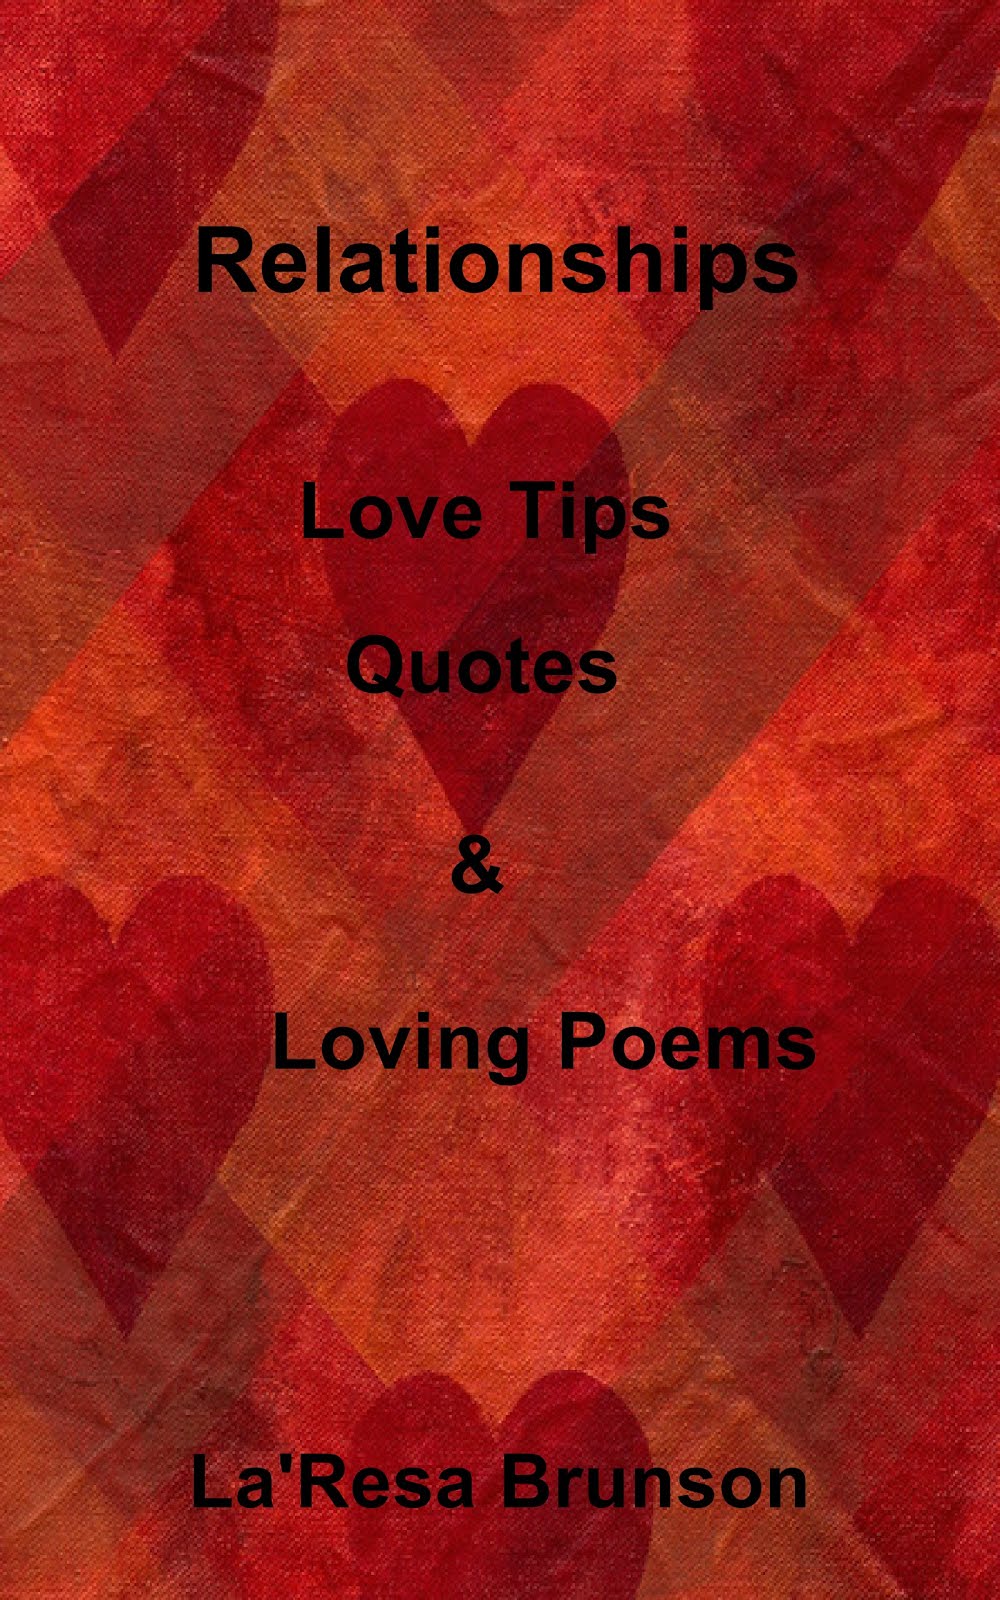 Relationships: Love Tips, Quotes & Loving Poems